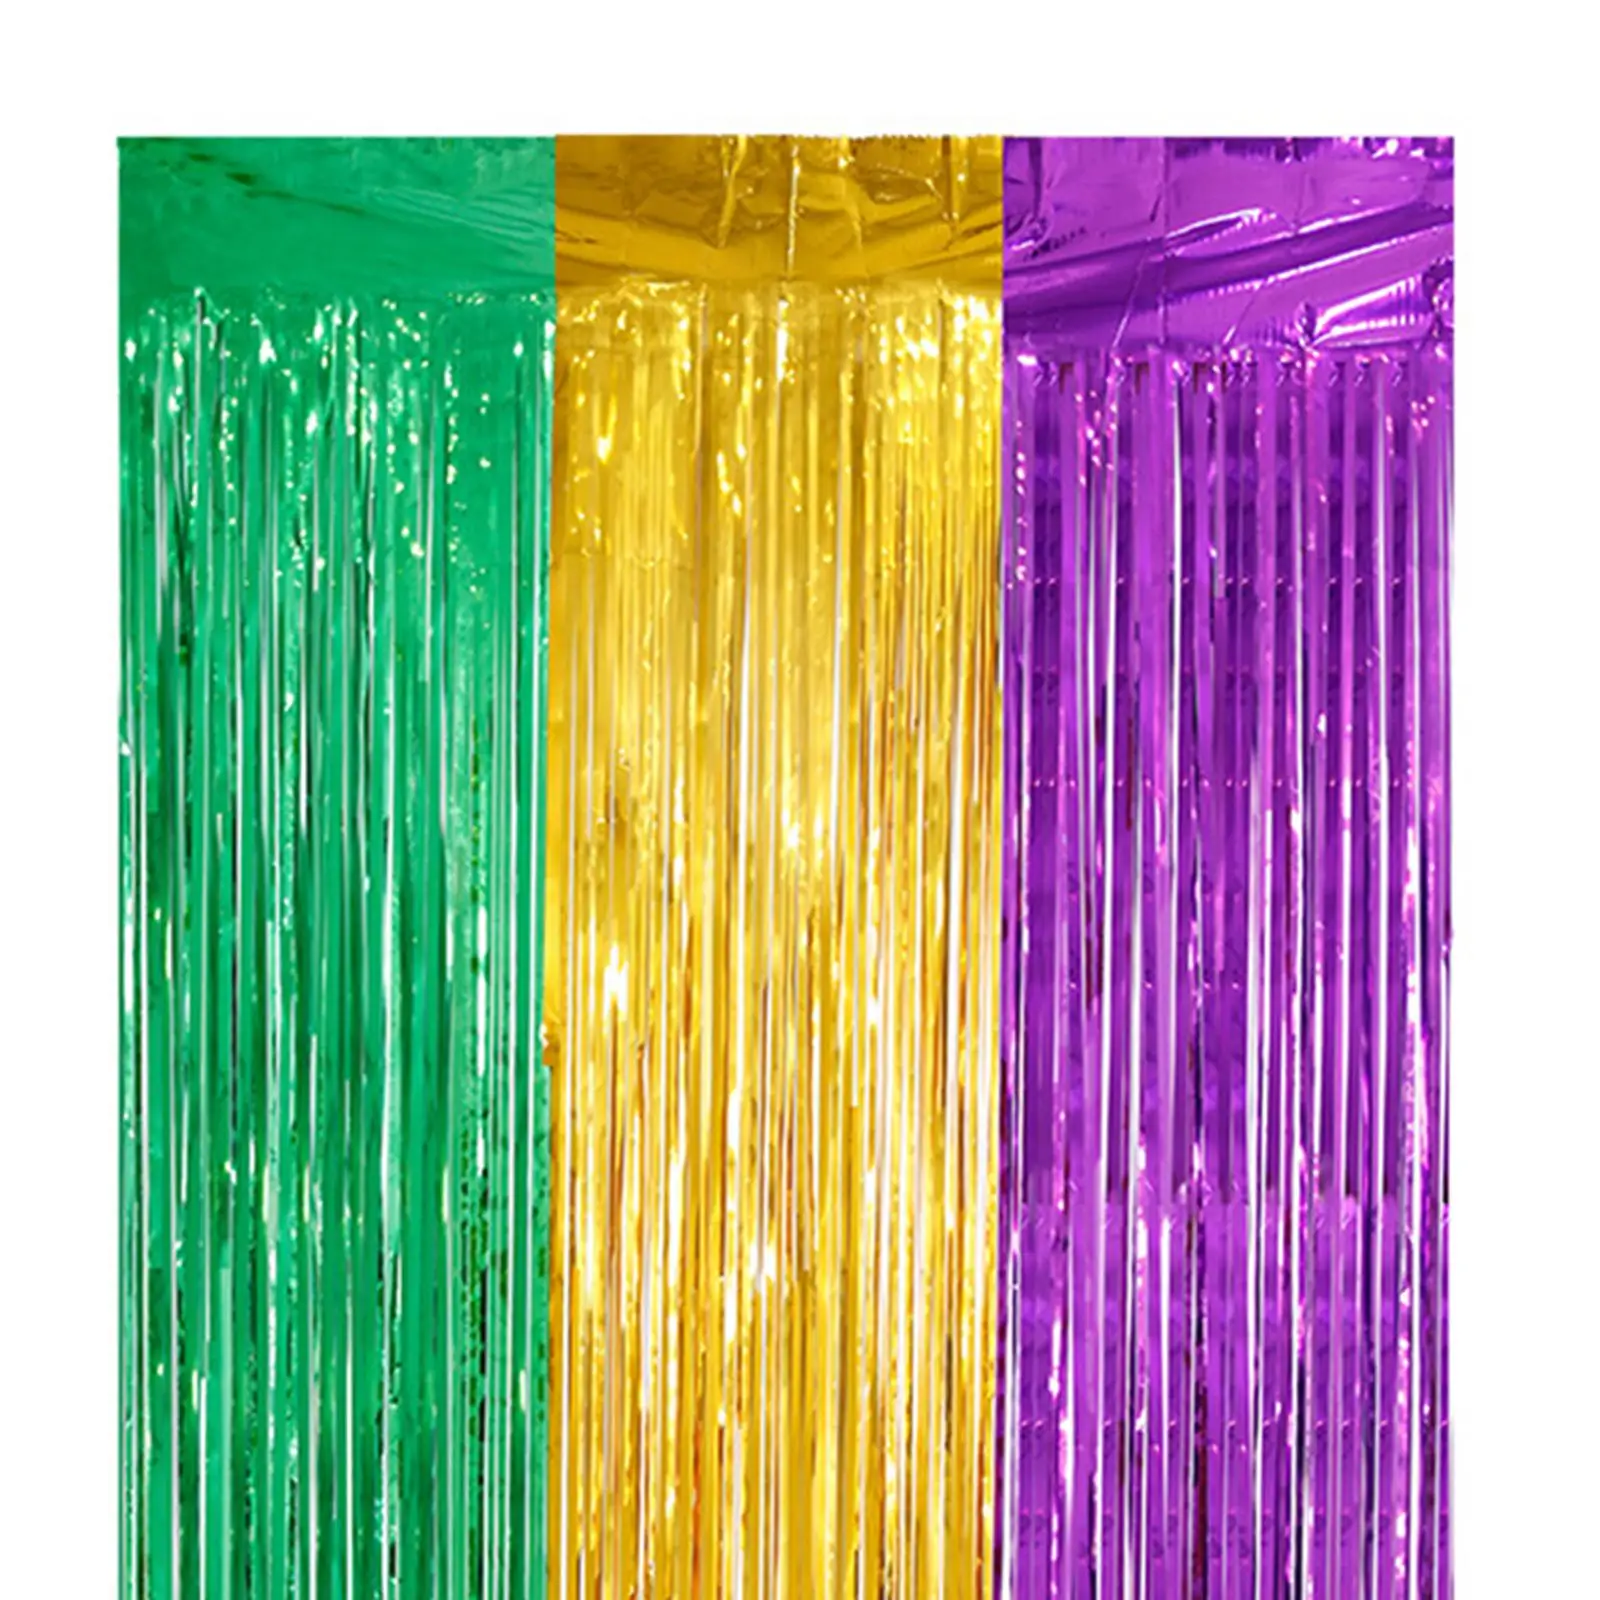 Mardi Gras Metallic Foil Fringe Curtains Photo Backdrop Carnival Foil Streamers Party Supplies for Holiday Door Wall Decoration